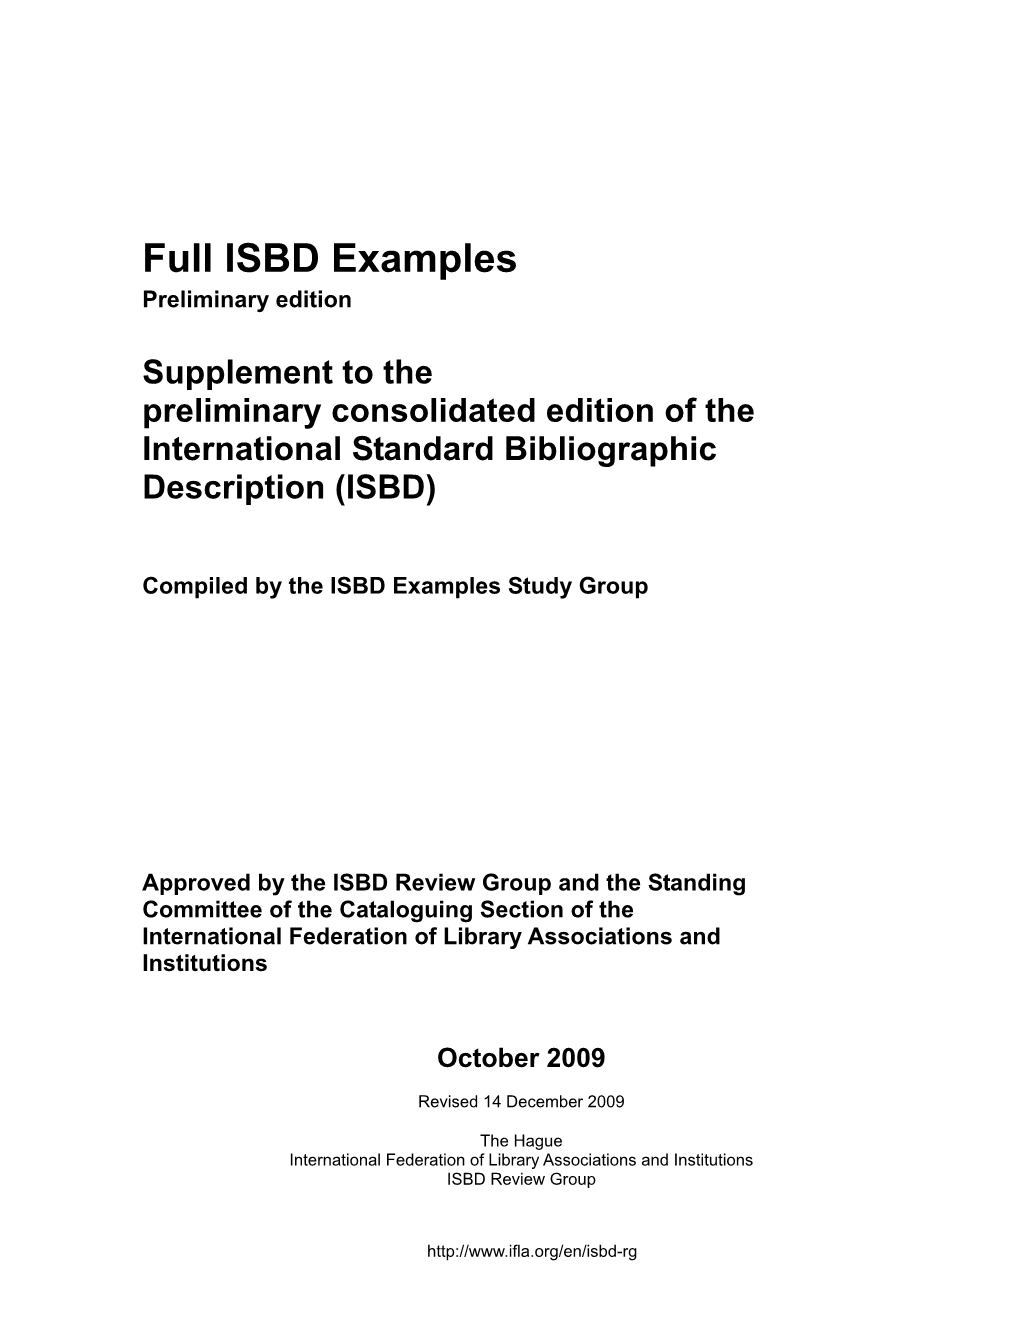 Full ISBD Examples Preliminary Edition